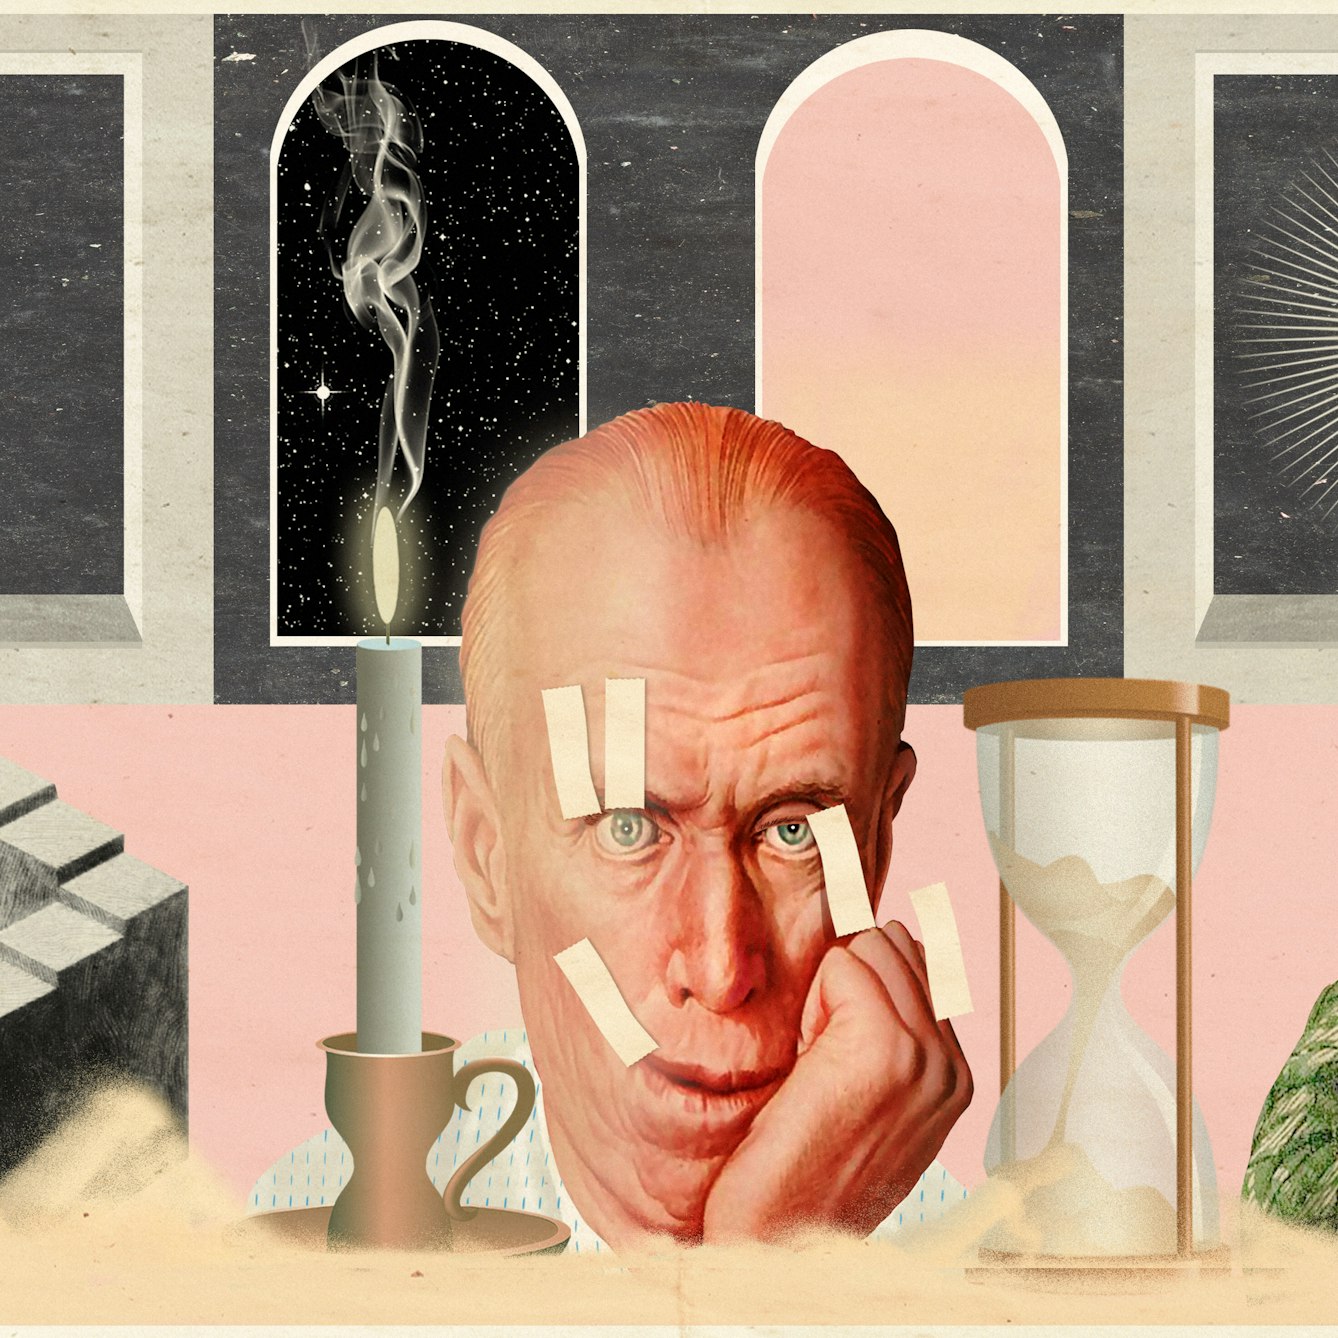 Mixed media digital artwork combining found imagery from vintage magazines and books with painted and textured elements. The overall hues are pastel yellows, pinks and greys with elements of harsh reds and oranges. At the centre of the artwork is an elderly man's face, his cheek resting on his hand. His thinning hair is swept back over his head and his eye stare blankly out in the distance. His right eyelid is being held open by two lengths of yellow tape and the right corner of his mouth is being held up into a forced smile by another length of tape. He looks exhausted. Behind his head are 2 doorways, one with a starry night sky and the other with a pink and yellow sunset sky. To the far left is a window with a diagram of the moon int he centre. To the far right is a window with a pictorial representation of the sun. To the left of the man's face is a large lit candle in a candlestick holder. To the right is a large hourglass which is cracked at the base, spilling sand out into a thick band across the bottom of the image. To the far right foreground is a diagram of a never ending staircase. To the far right foreground is a drawing of the back of the head and shoulders of a young man wearing a green checked jacket holding up an oval mirror in front of his face. His face in the reflection is of an old version of himself.